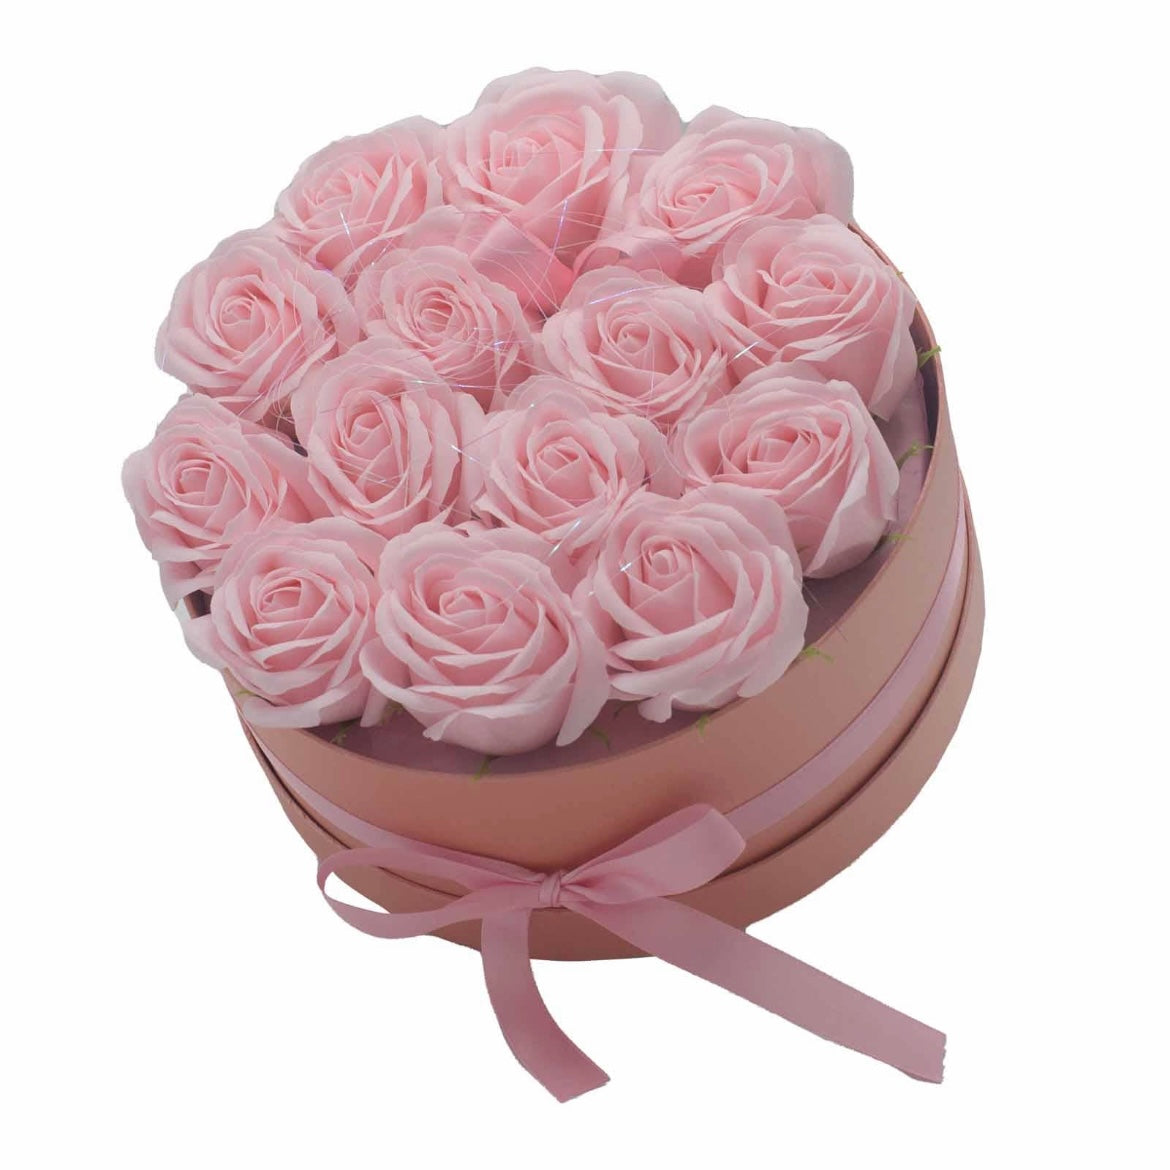 Stunning Rose Bouquet Soap - Large Round Shape Pink